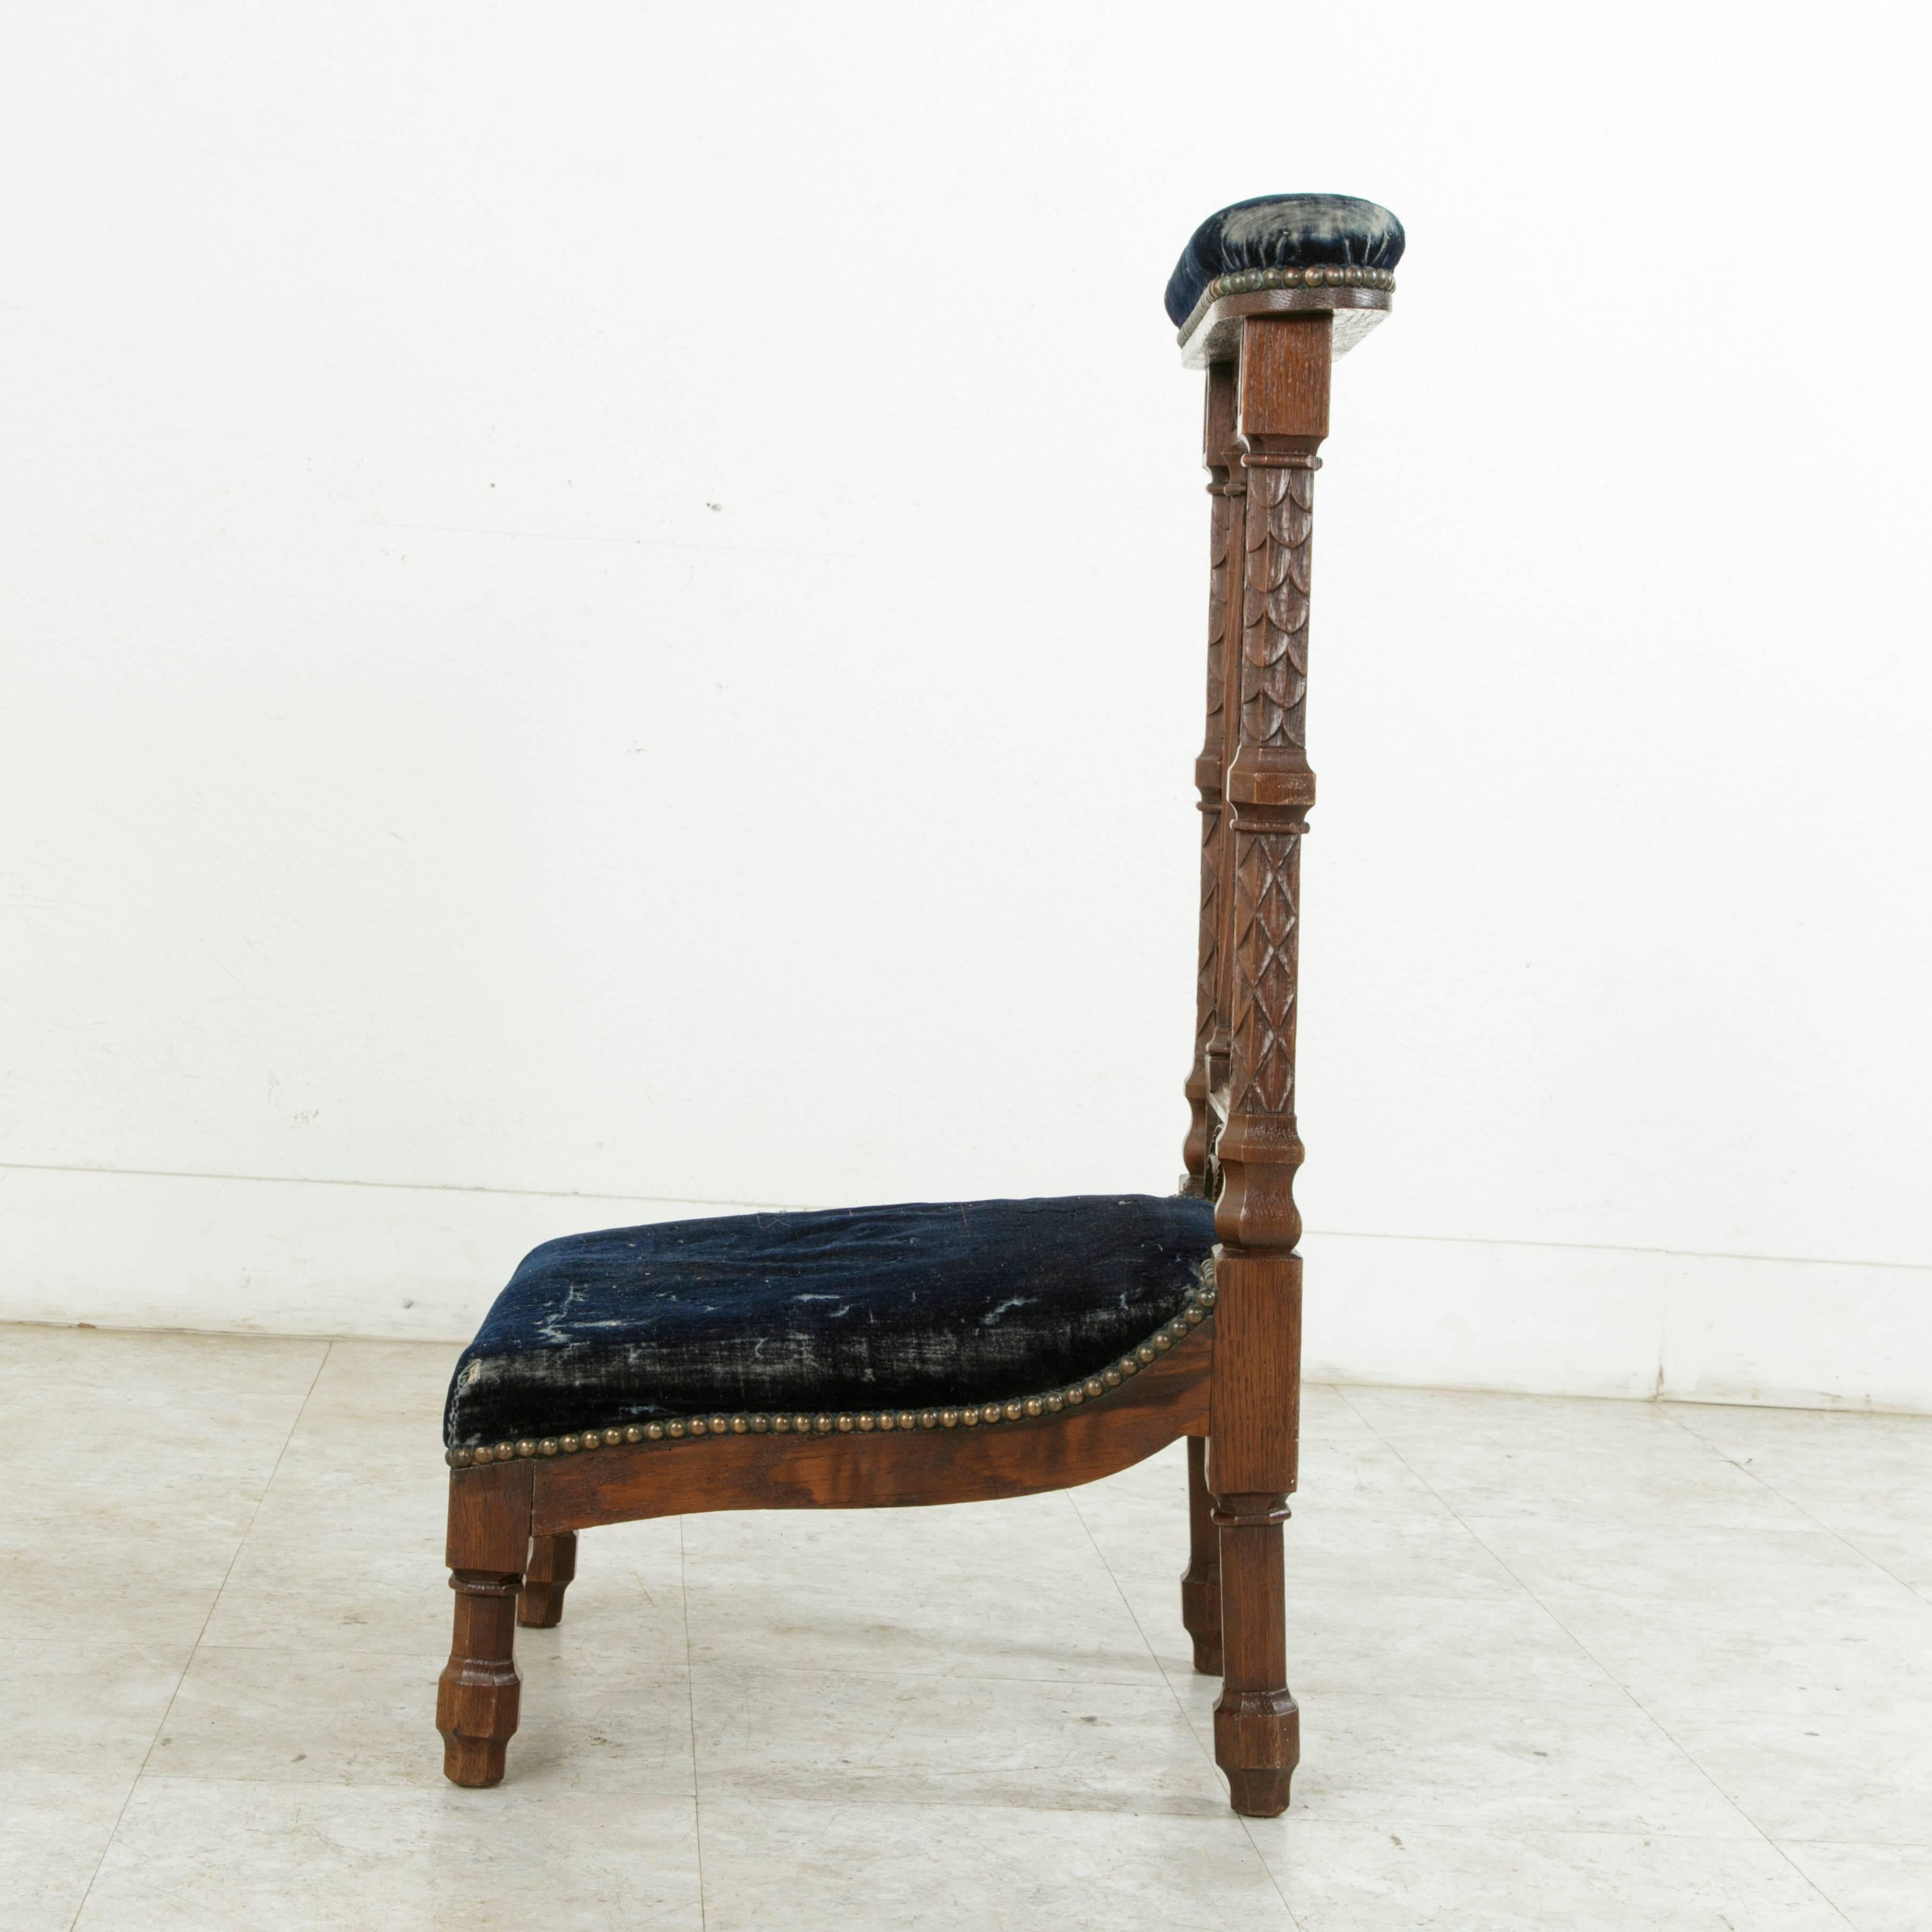 Gothic Revival Late 19th Century French Hand-Carved Oak Prie-Dieu or Prayer Chair with Cross